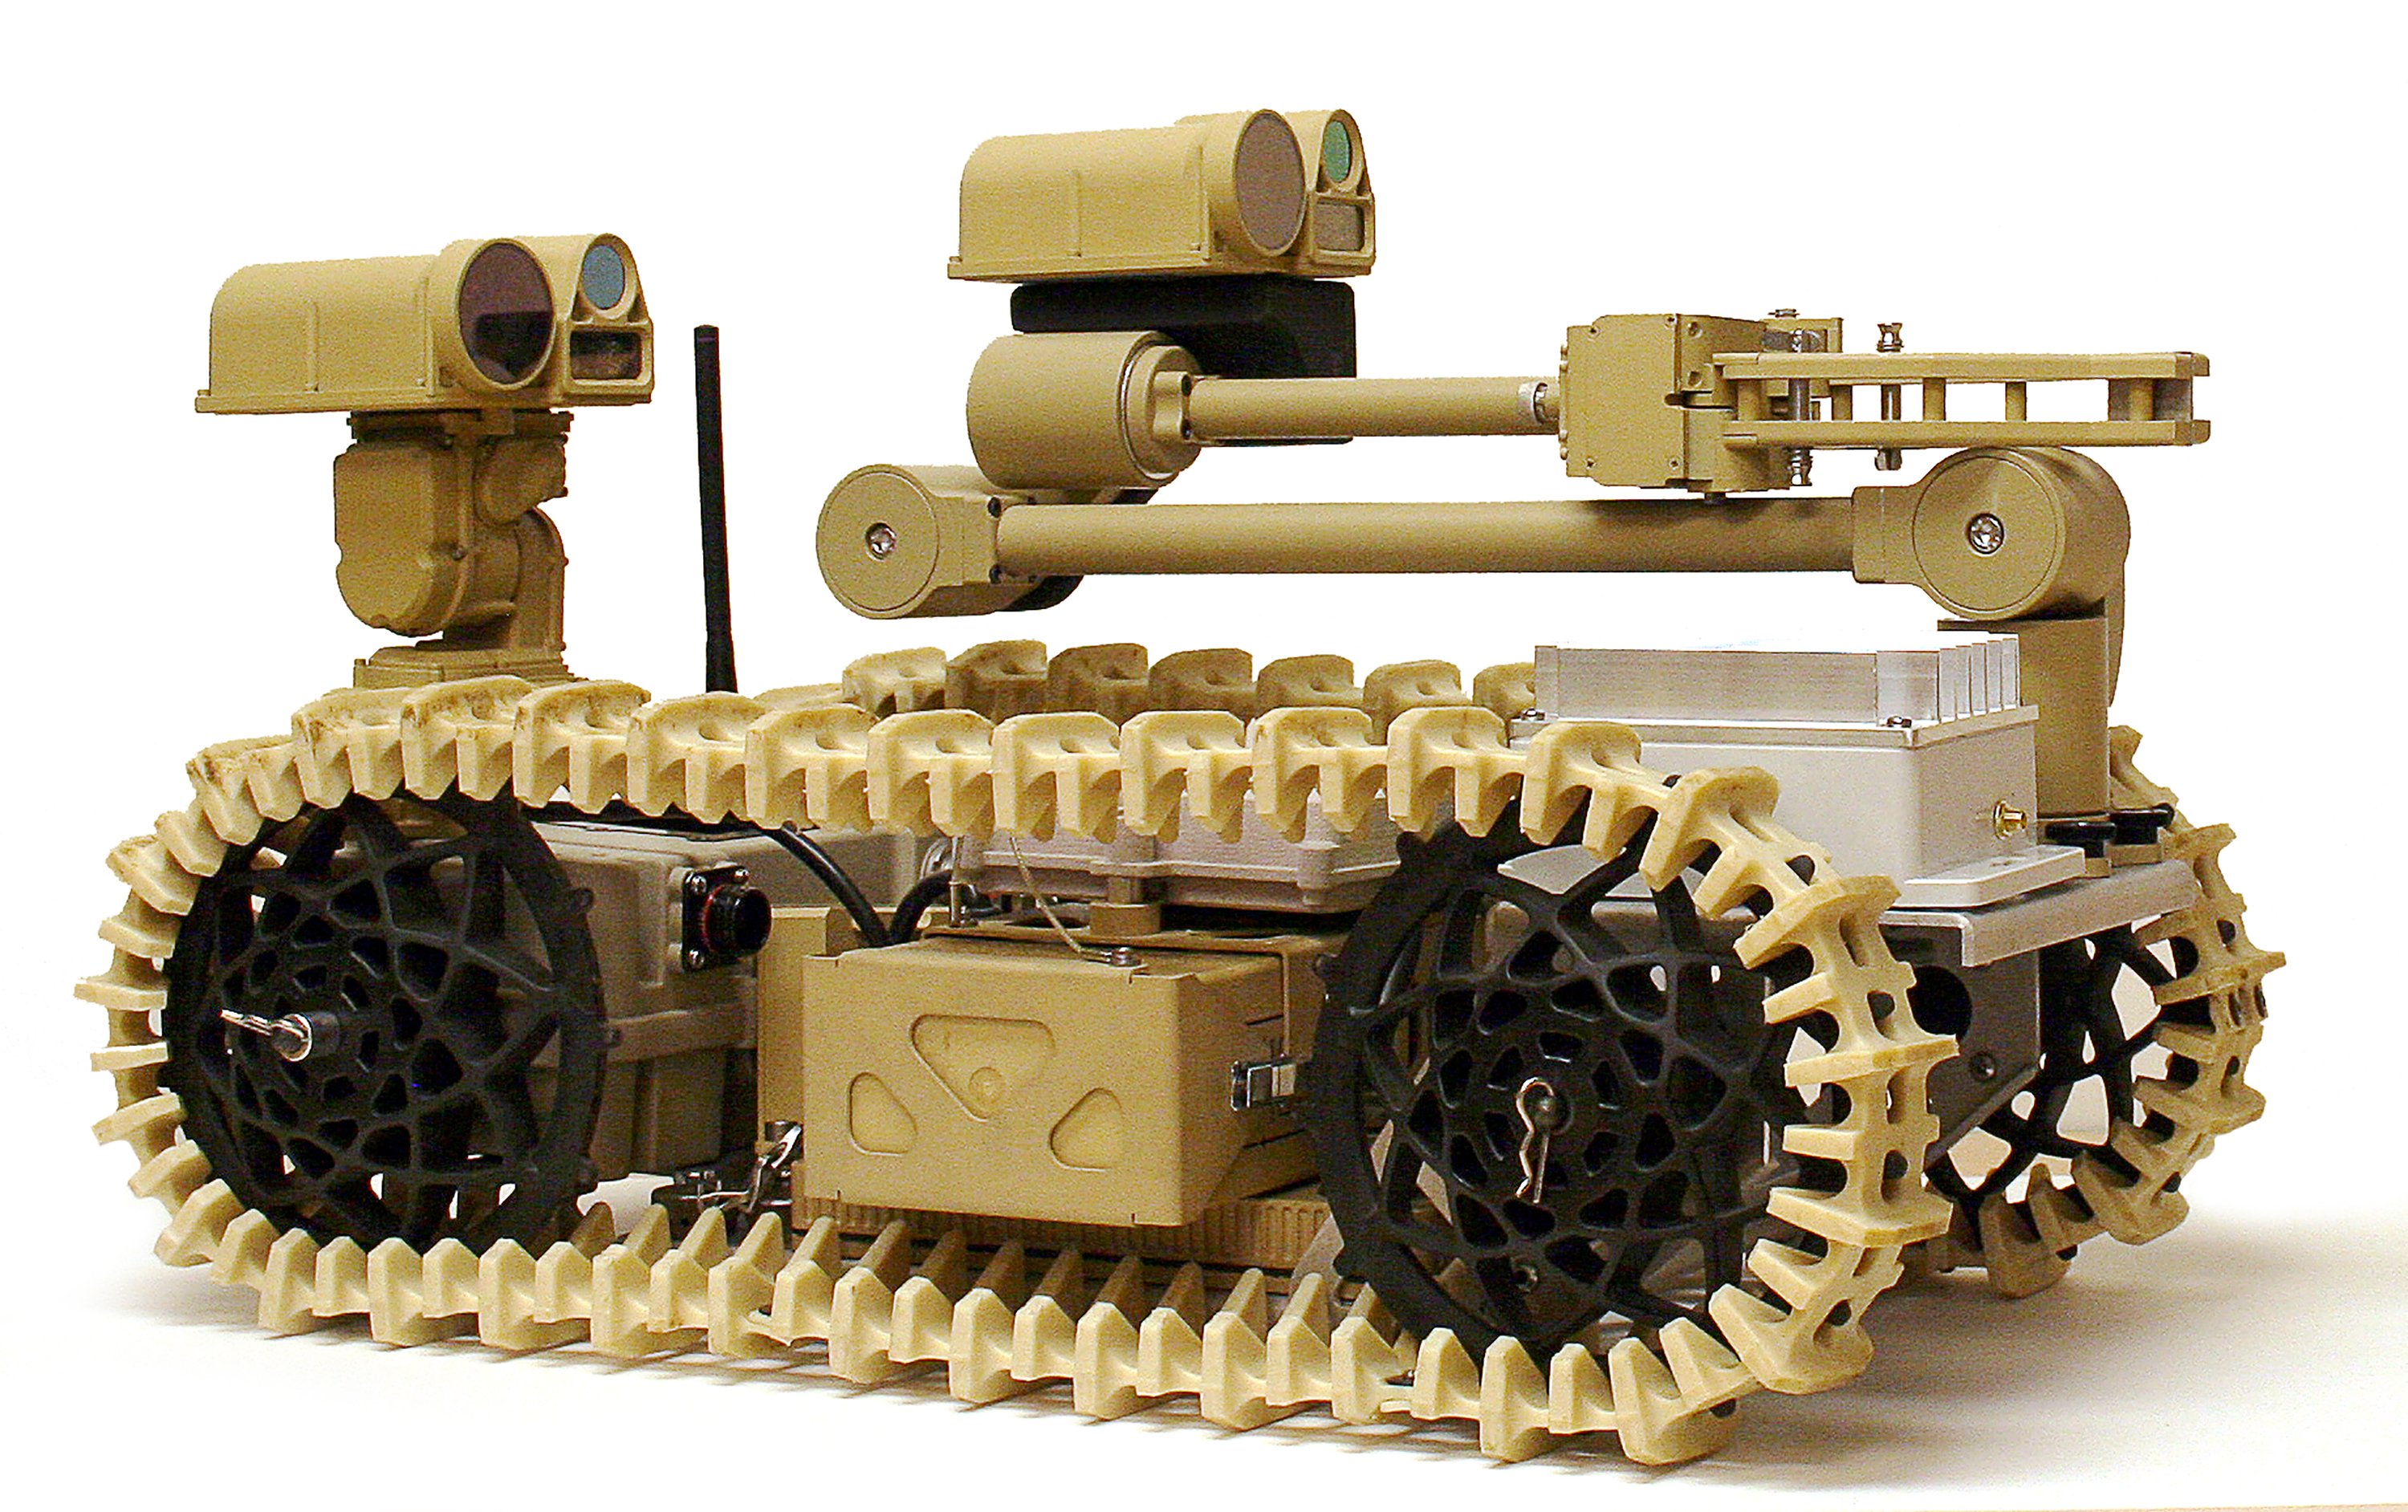 The successful Critical Design Review determined that Northrop Grumman's final design for the Advanced Explosive Ordnance Disposal Robotic System dismounted operations variant satisfies cost, schedule and mission performance requirements and demonstrates the maturity for proceeding with system fabrication, assembly, integration and test. Northrop Grumman image.